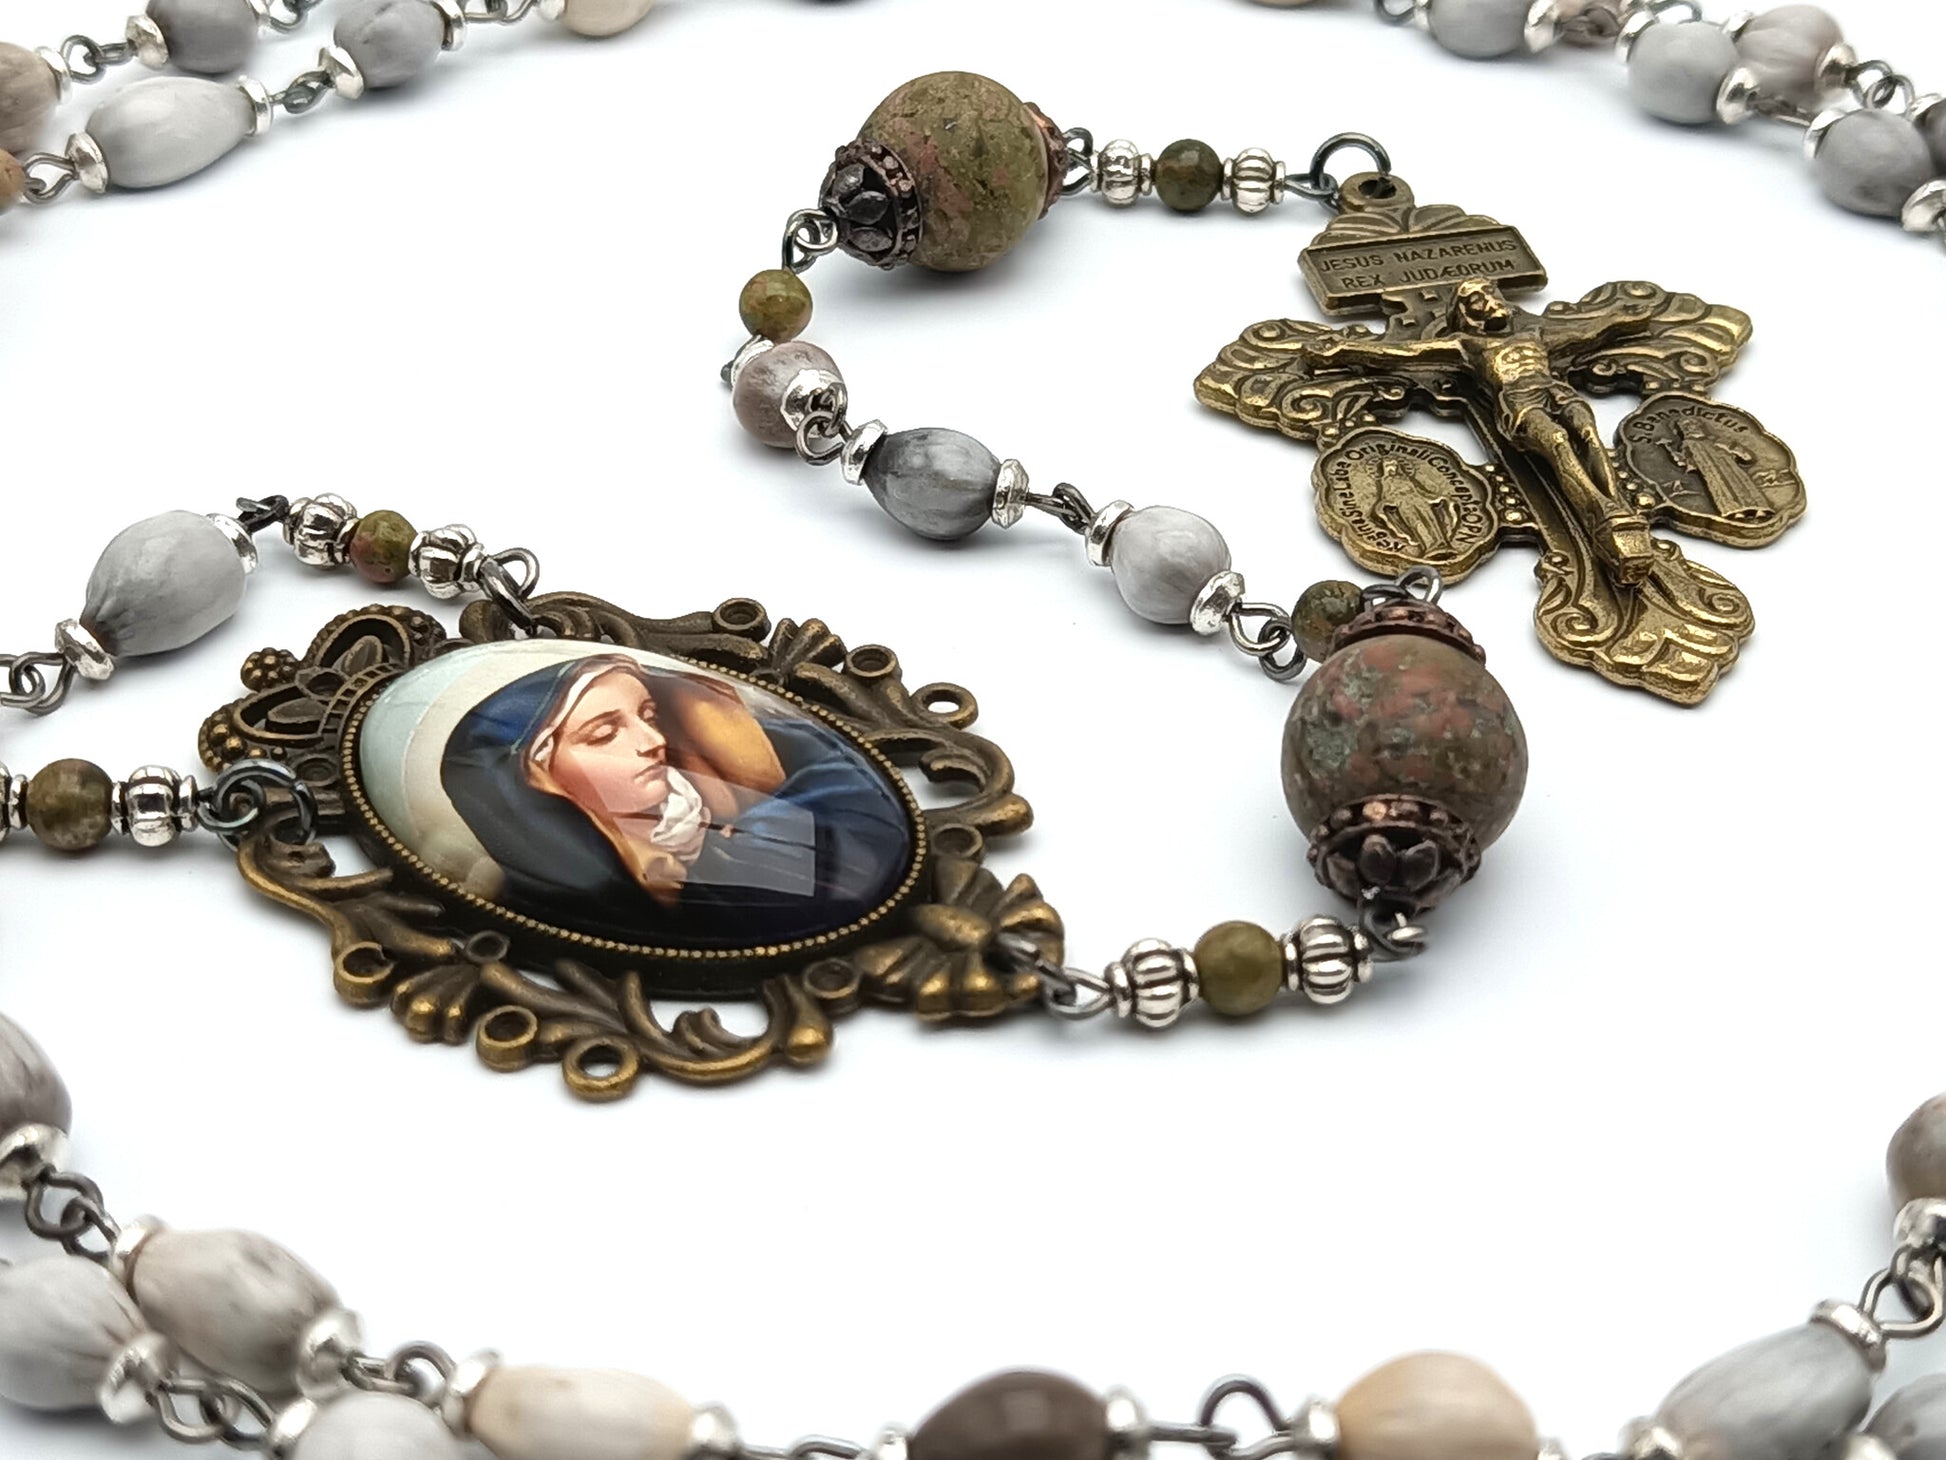 Our Lady of Sorrows unique rosary beads with Jobs tears beads, jasper gemstone pater beads, bronze pardon crucifix and picture centre medal.